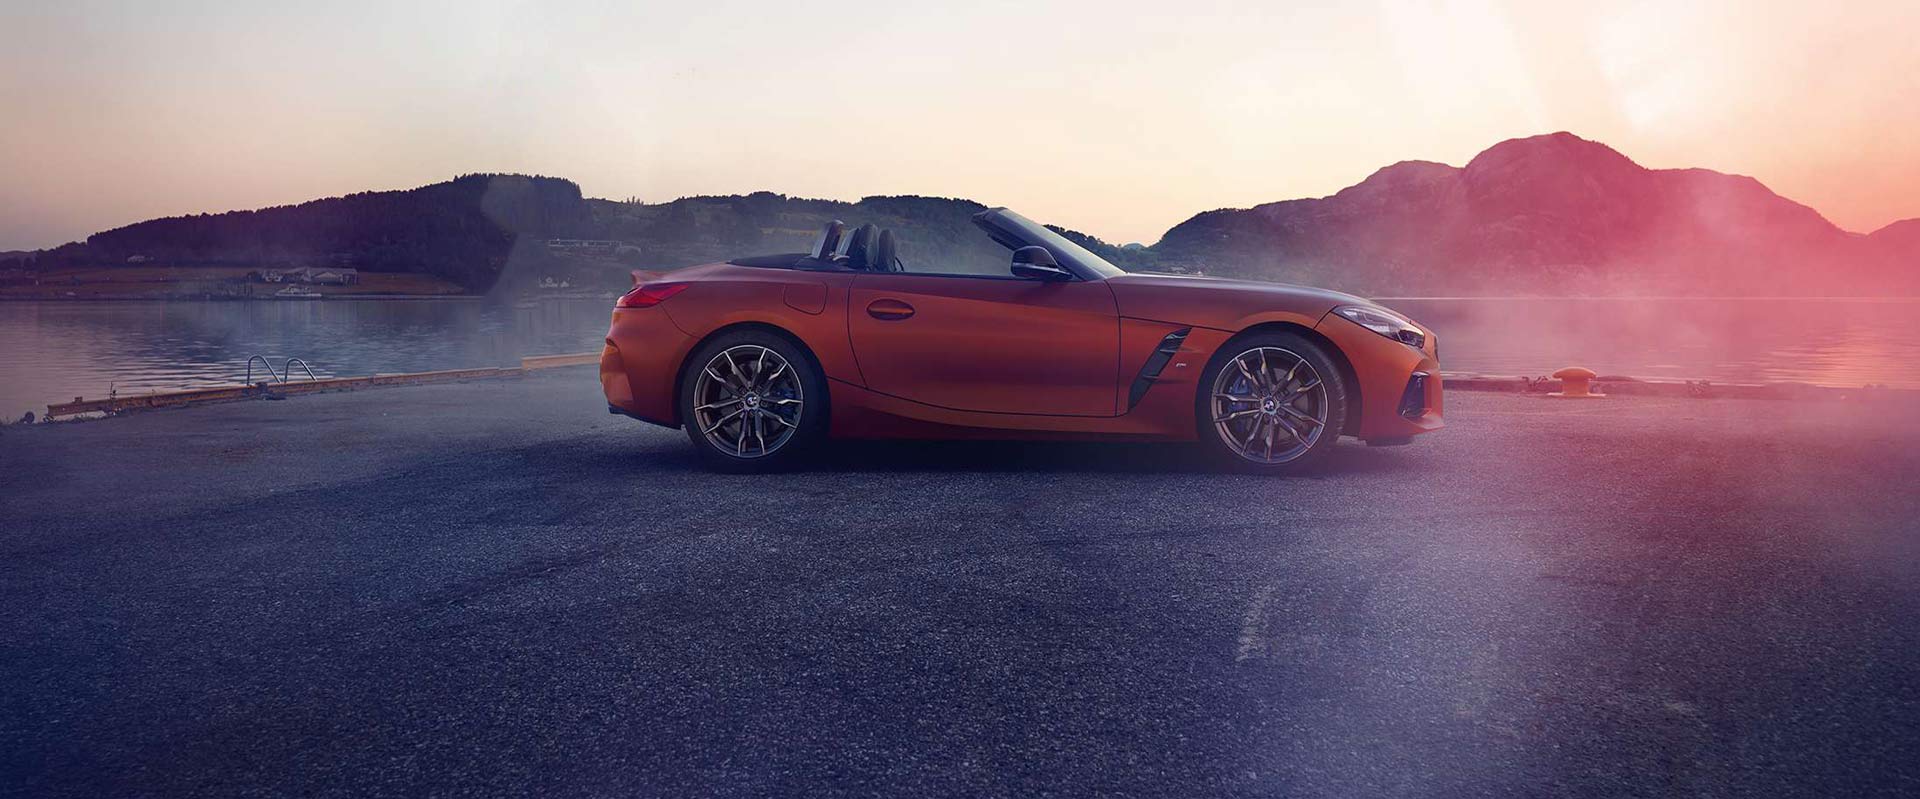 exterior of the Z4 roadster